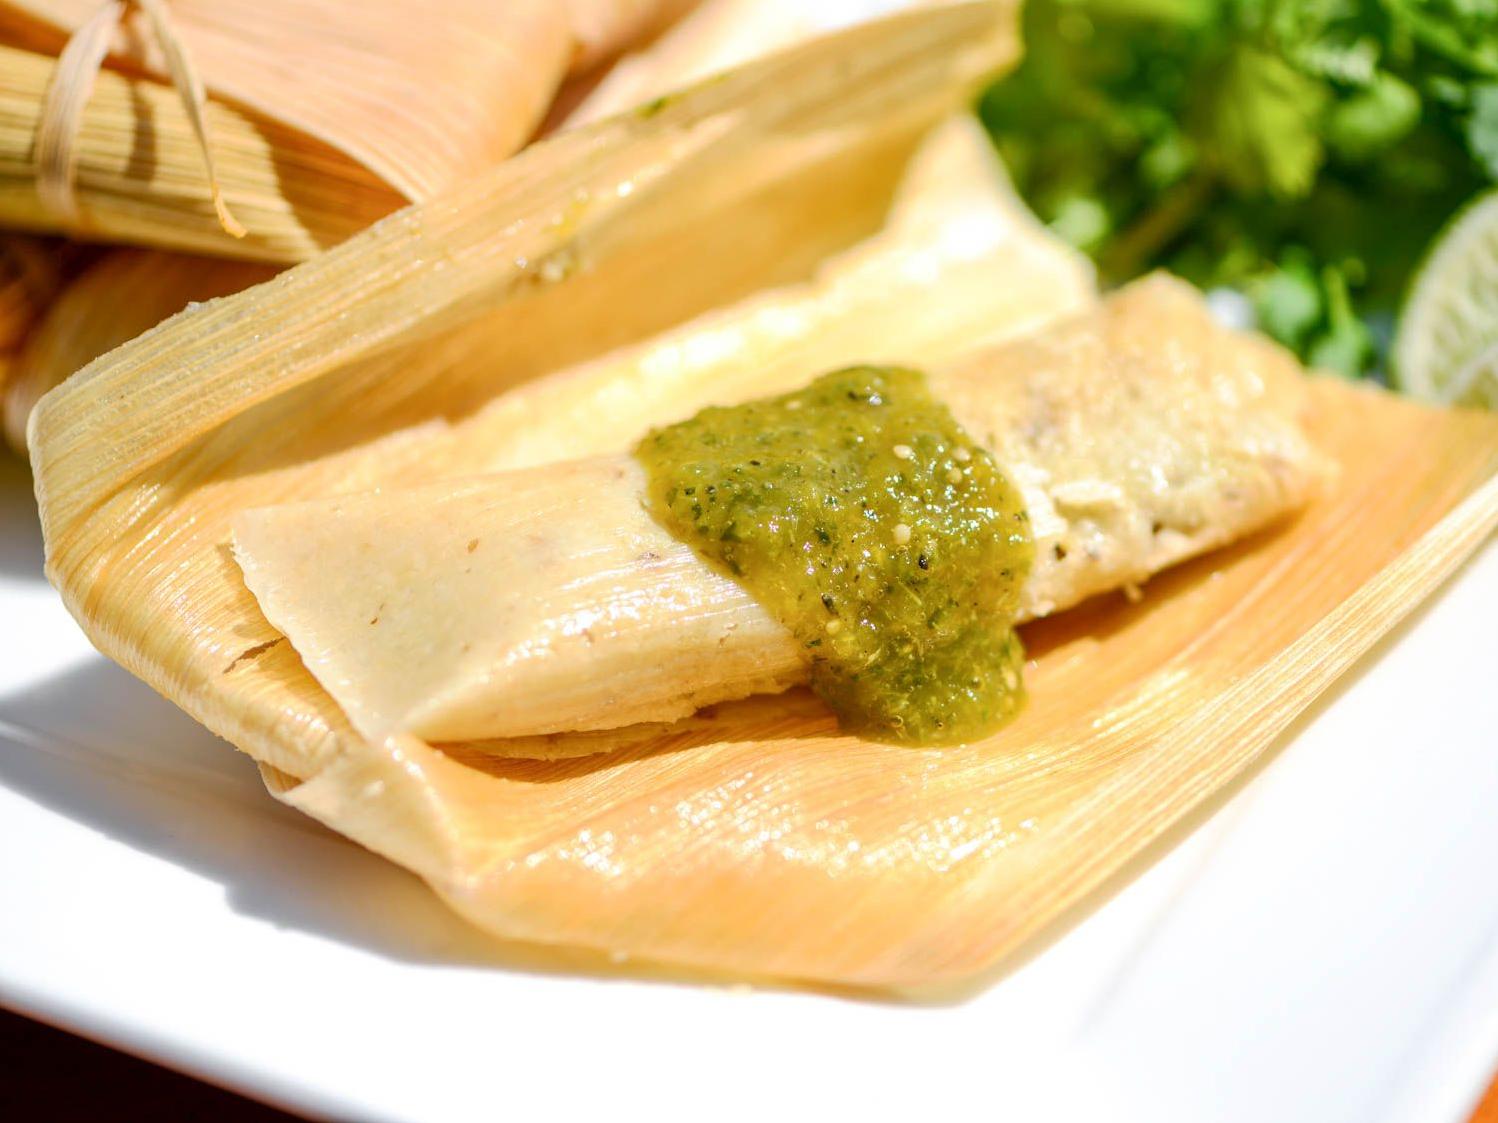  The perfect combination of tender pork and tangy salsa verde.